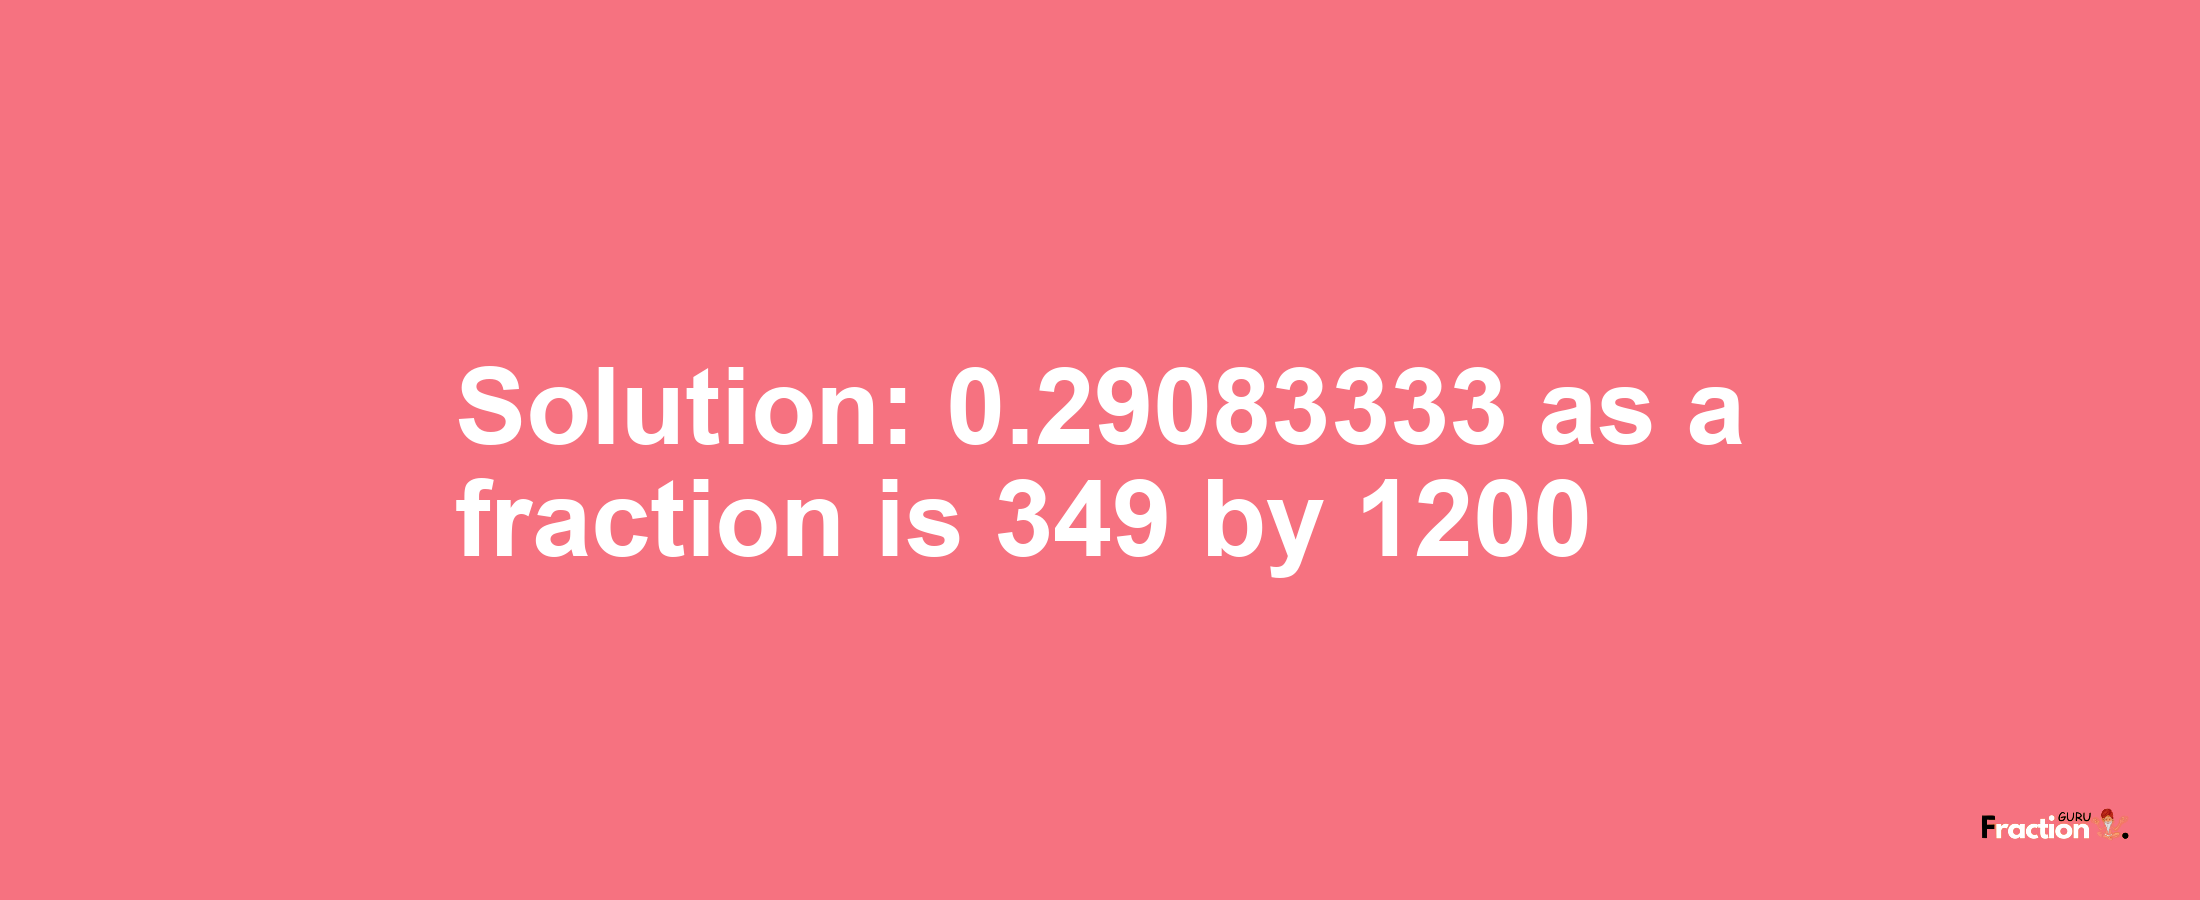 Solution:0.29083333 as a fraction is 349/1200